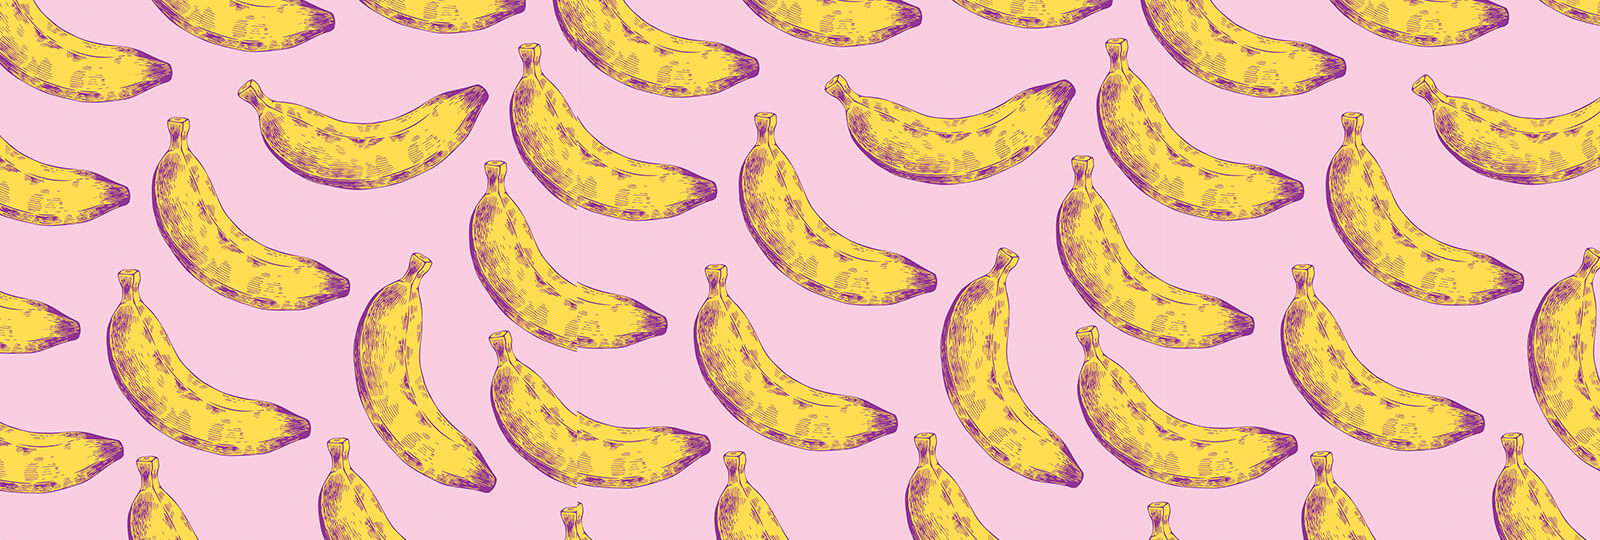 A collage of drawings of bananas